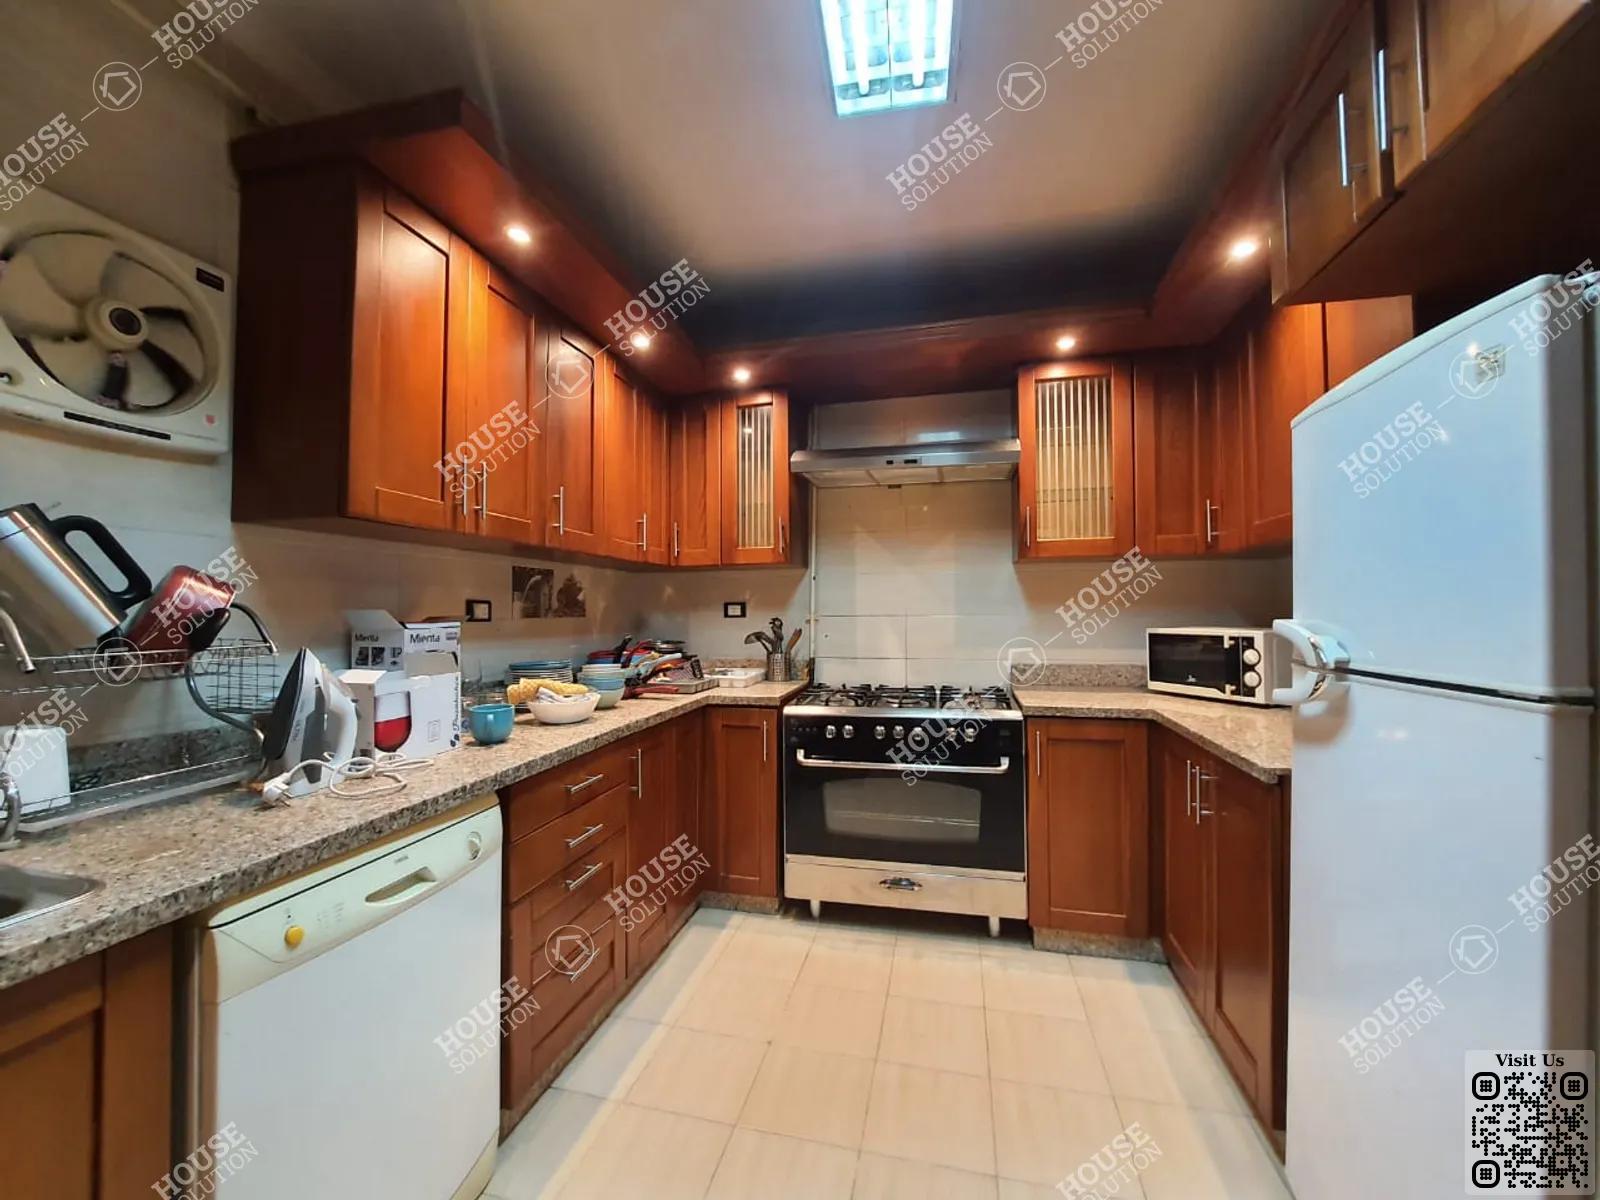 KITCHEN  @ Apartments For Rent In Maadi Maadi Degla Area: 140 m² consists of 2 Bedrooms 2 Bathrooms Modern furnished 5 stars #5275-1